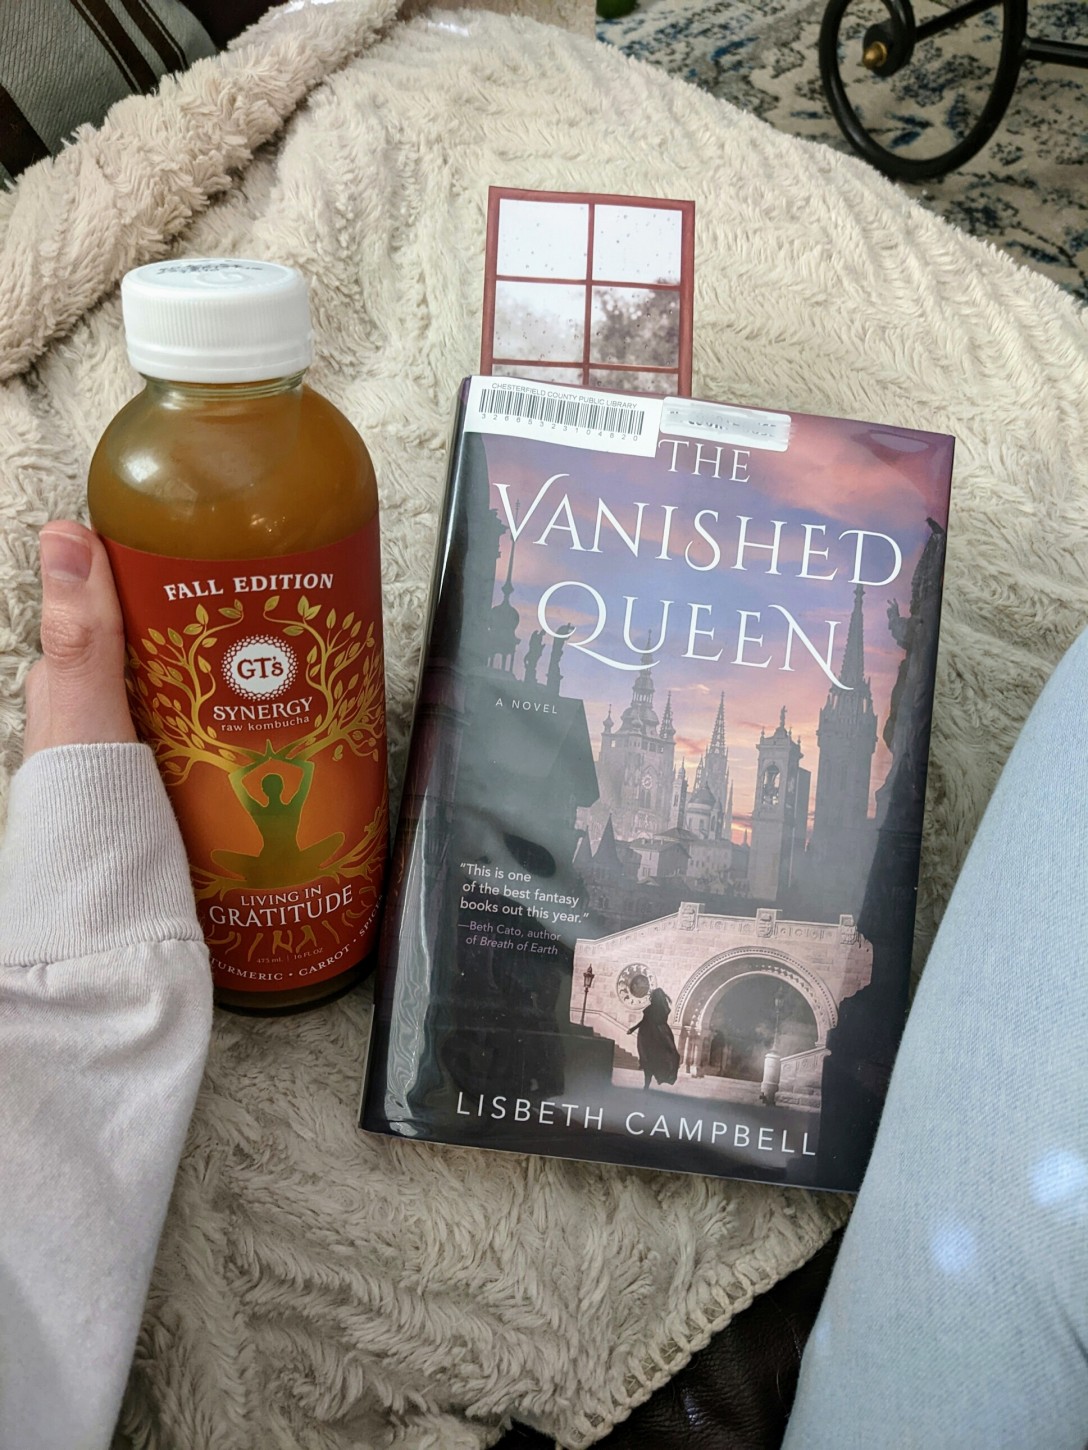 Alexis holds a fall kombucha bottle next to a library copy of The Vanished Queen.